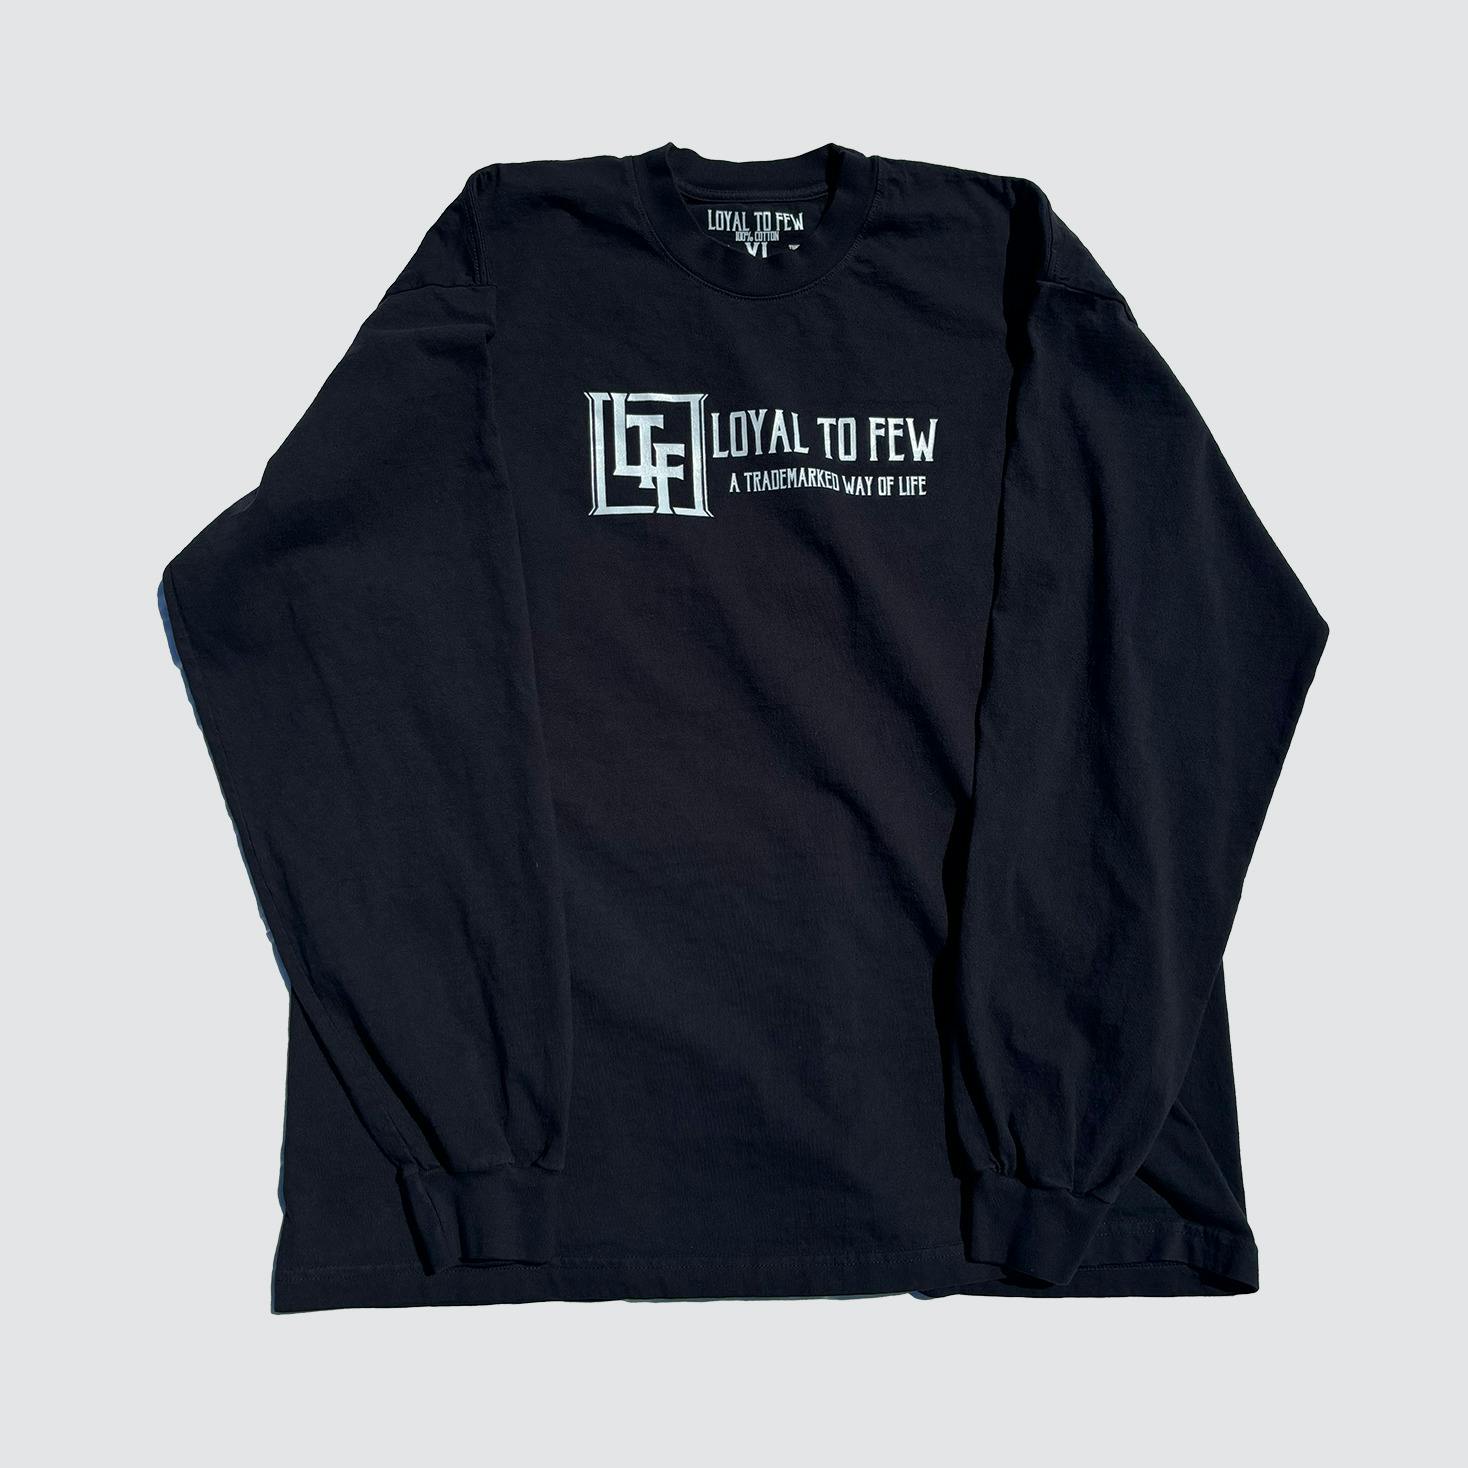 Cotton Long-Sleeve with Original